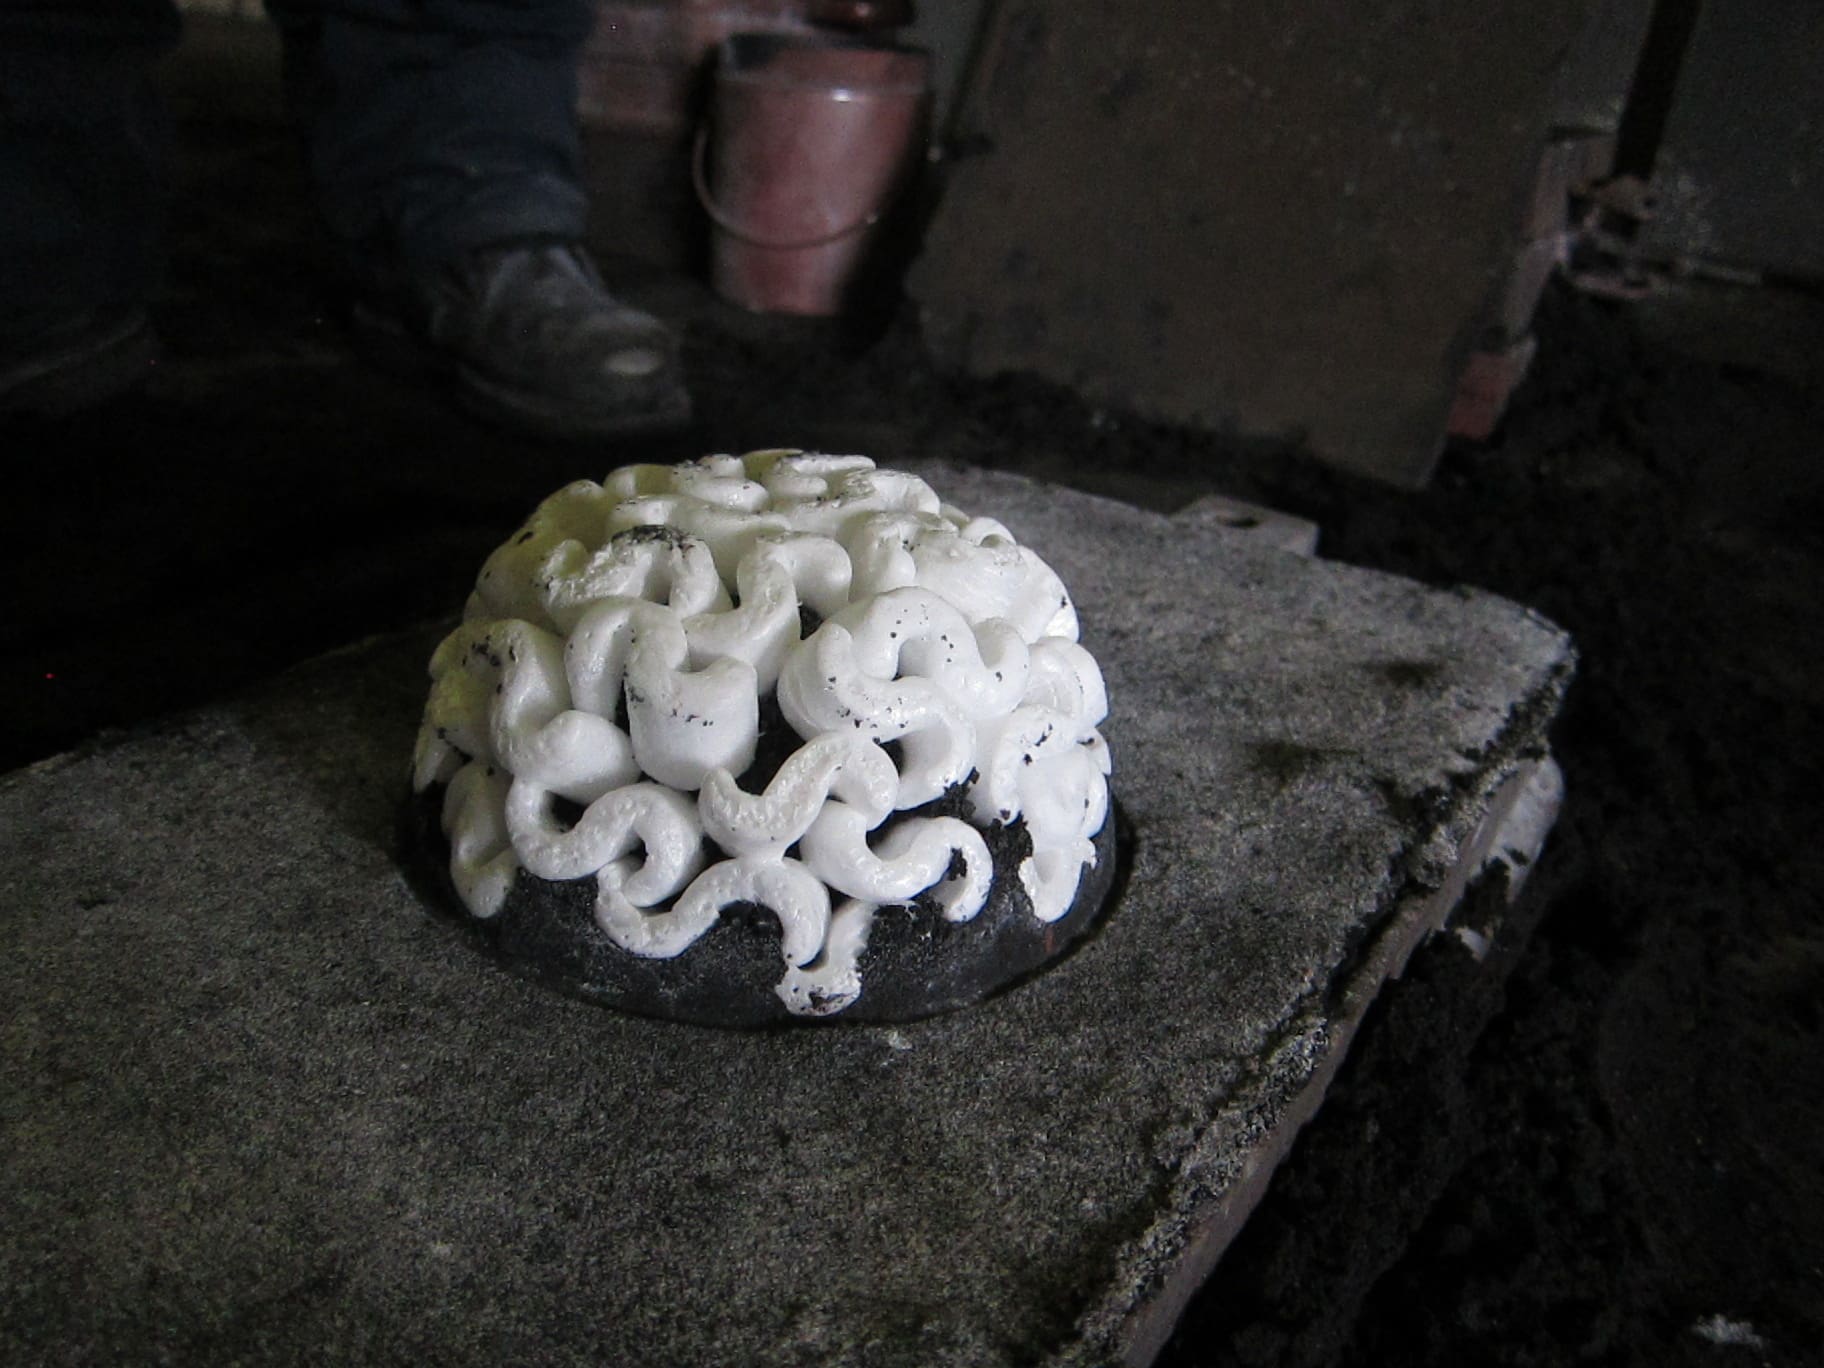 upside down bowl with white Styrofoam to look like a brain